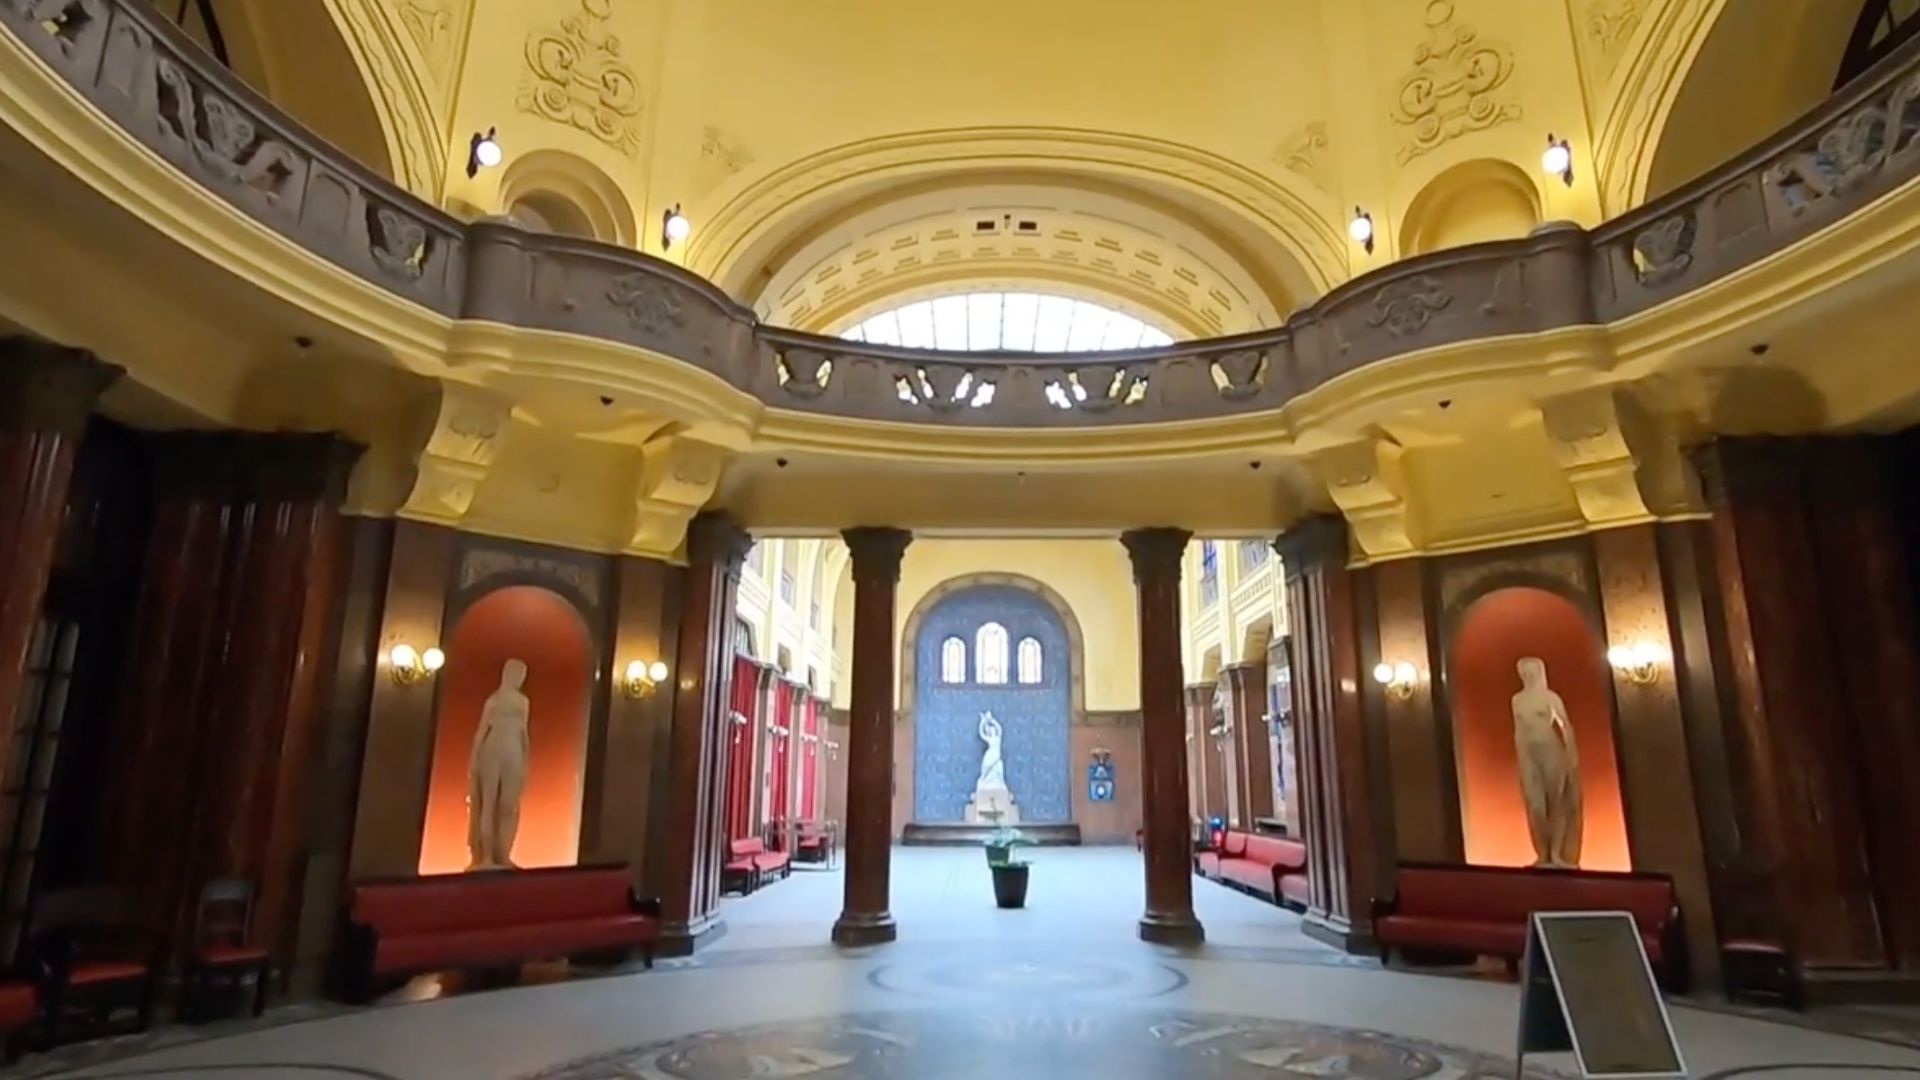 Grand hall of Gellért Thermal Bath with statues and ornate details